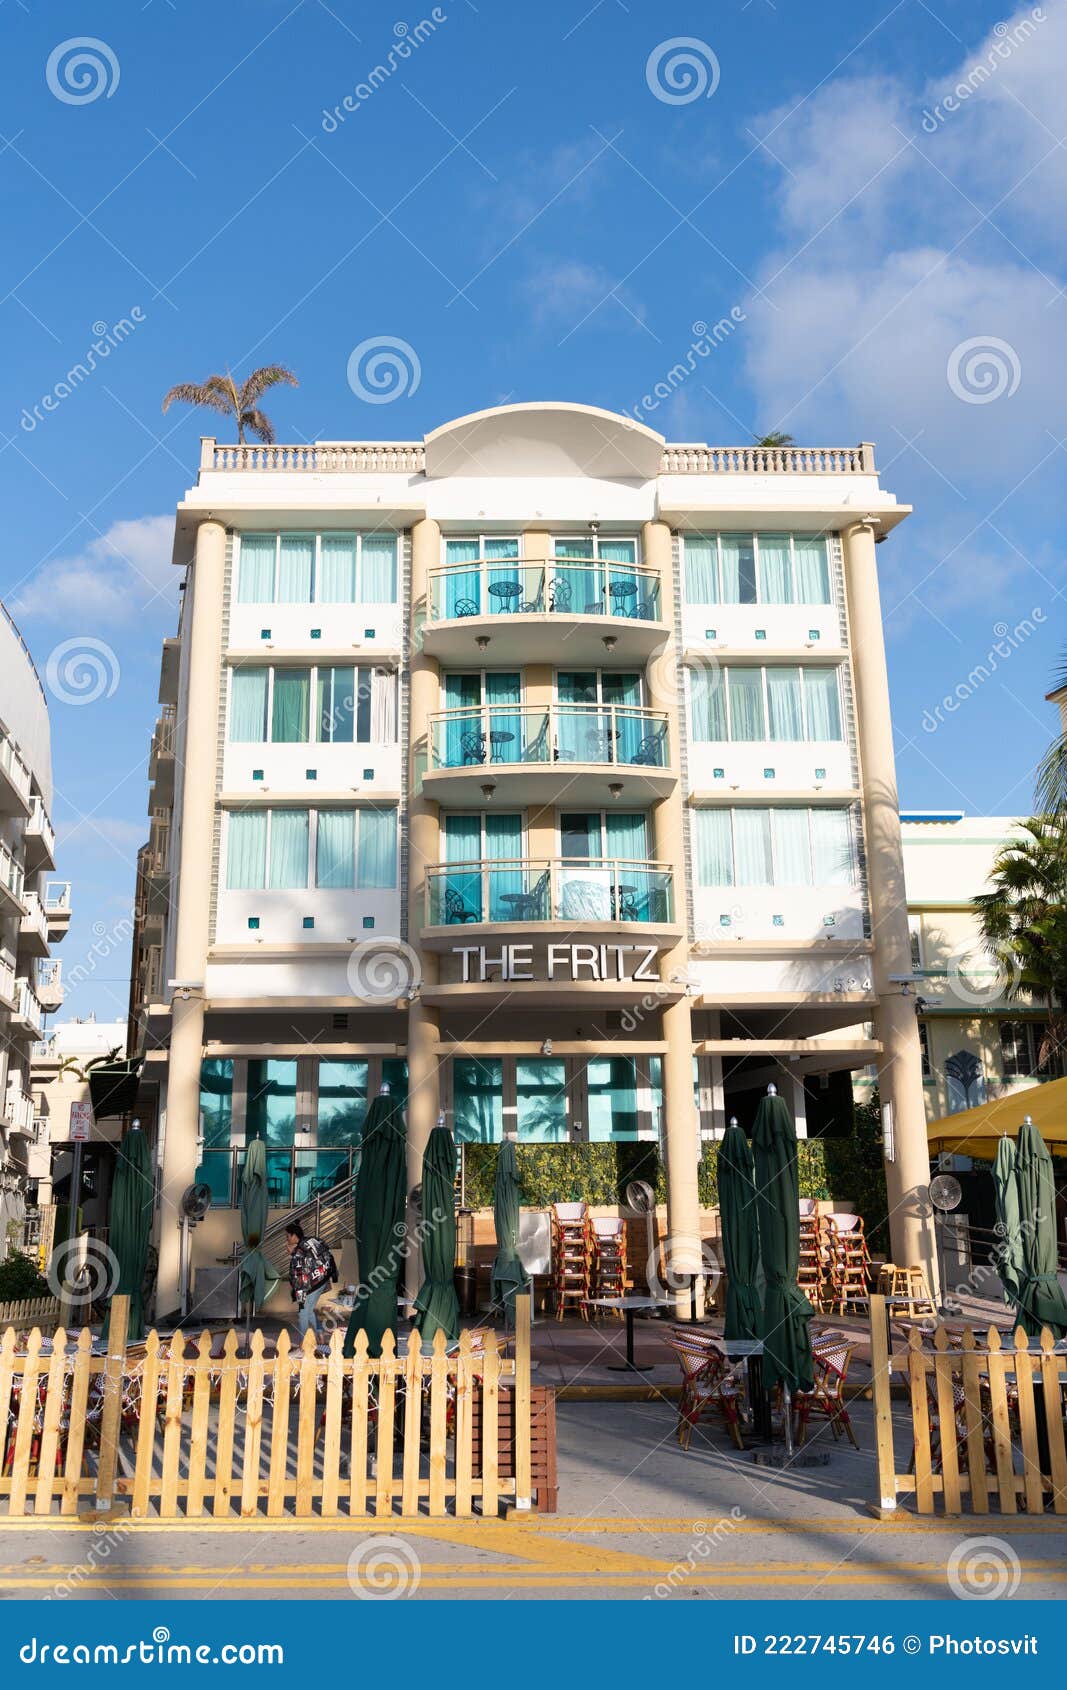 Miami Usa April 15 2021 The Fritz Hotel On Ocean Drive In Florida Editorial Photo Image